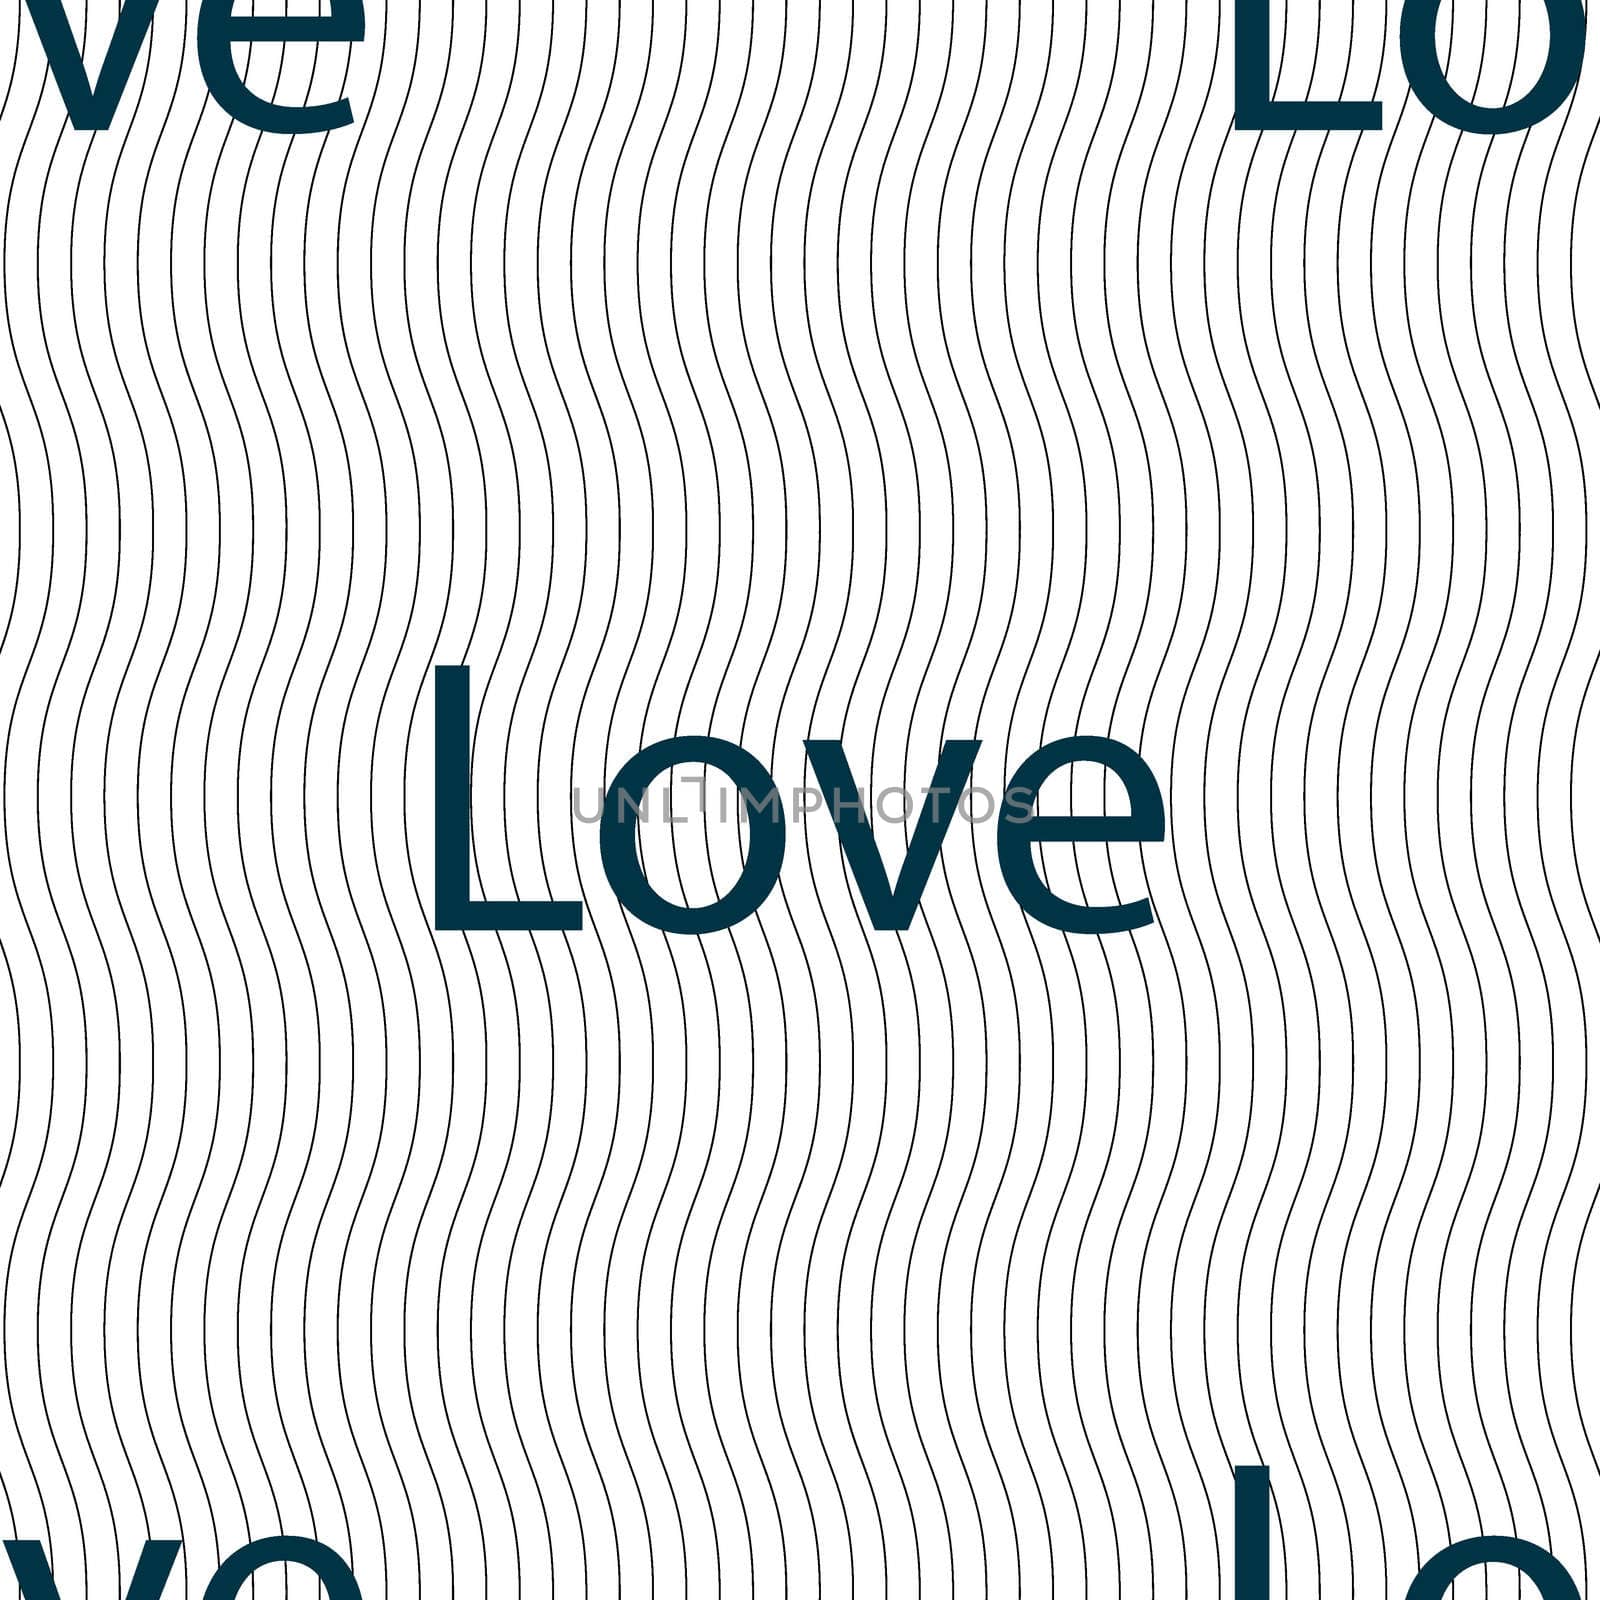 Love you sign icon. Valentines day symbol. Seamless pattern with geometric texture. illustration